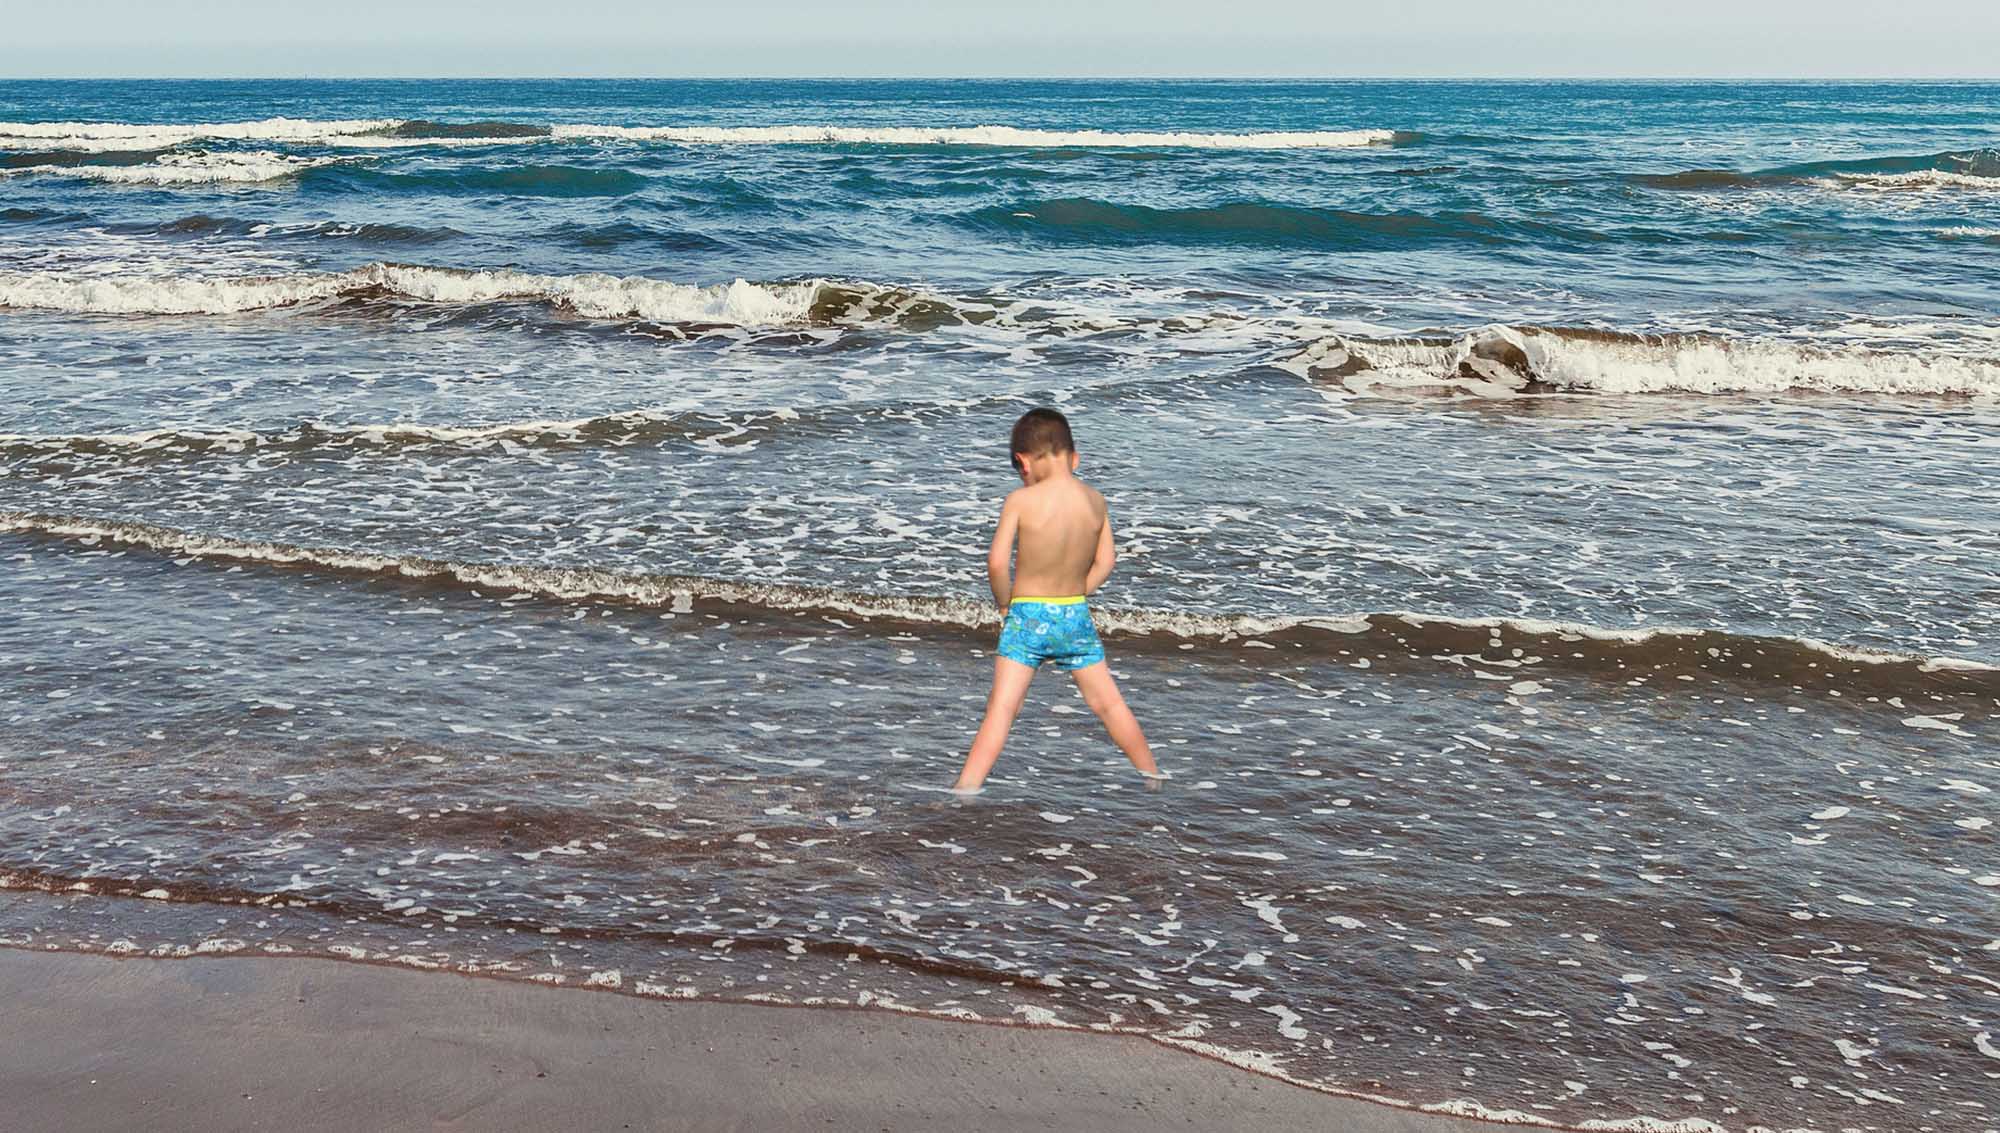 Poseidon Incarnate This Little Boy At The Beach Is Standing At The Shoreline With His Bathing Suit Down Peeing Directly Into The Waves pic